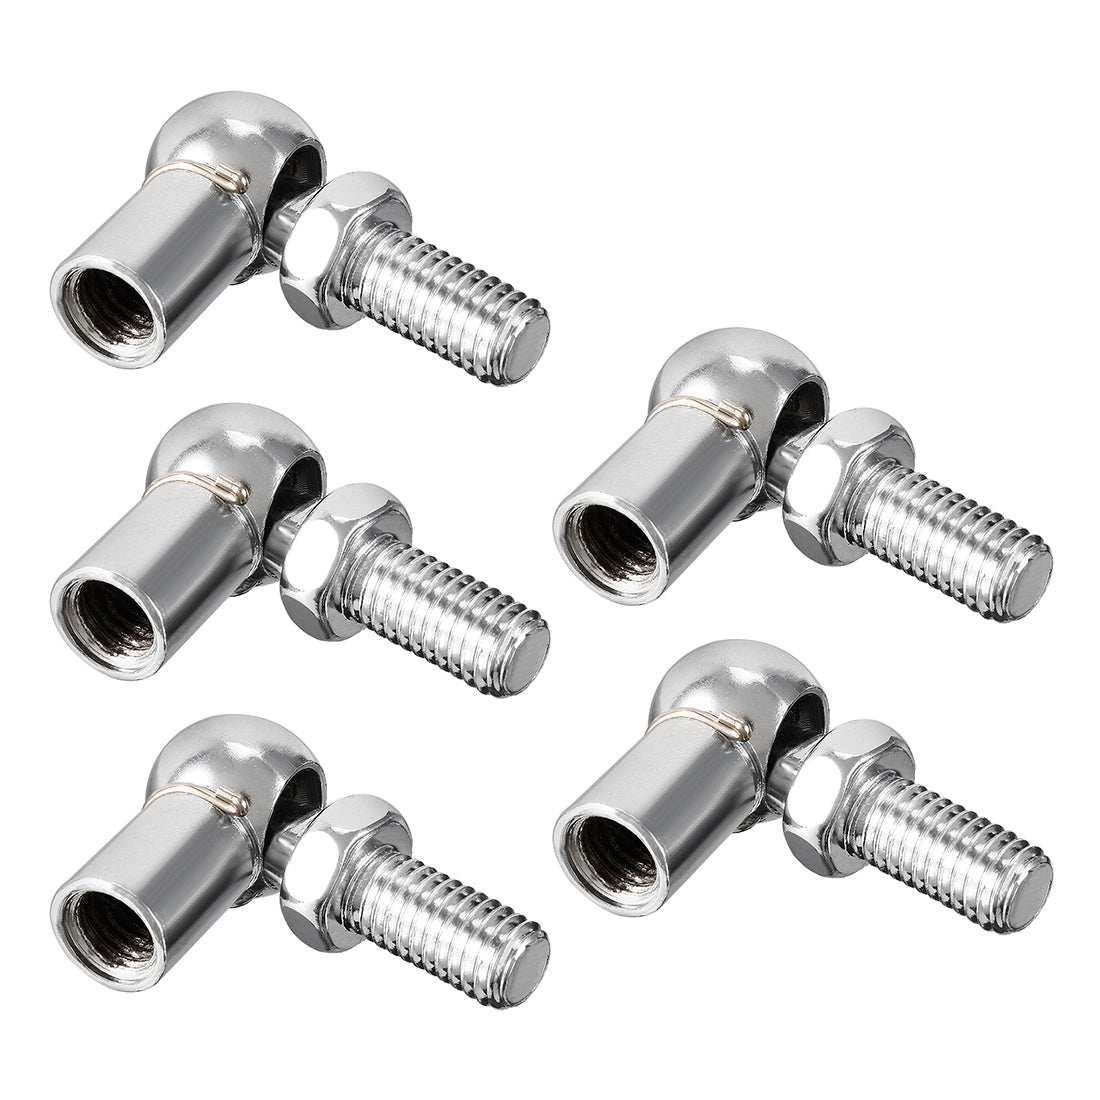 uxcell Uxcell Gas Spring End Fitting M8 Female Thread 8mm Round Handle Dia A3 Steel 5pcs